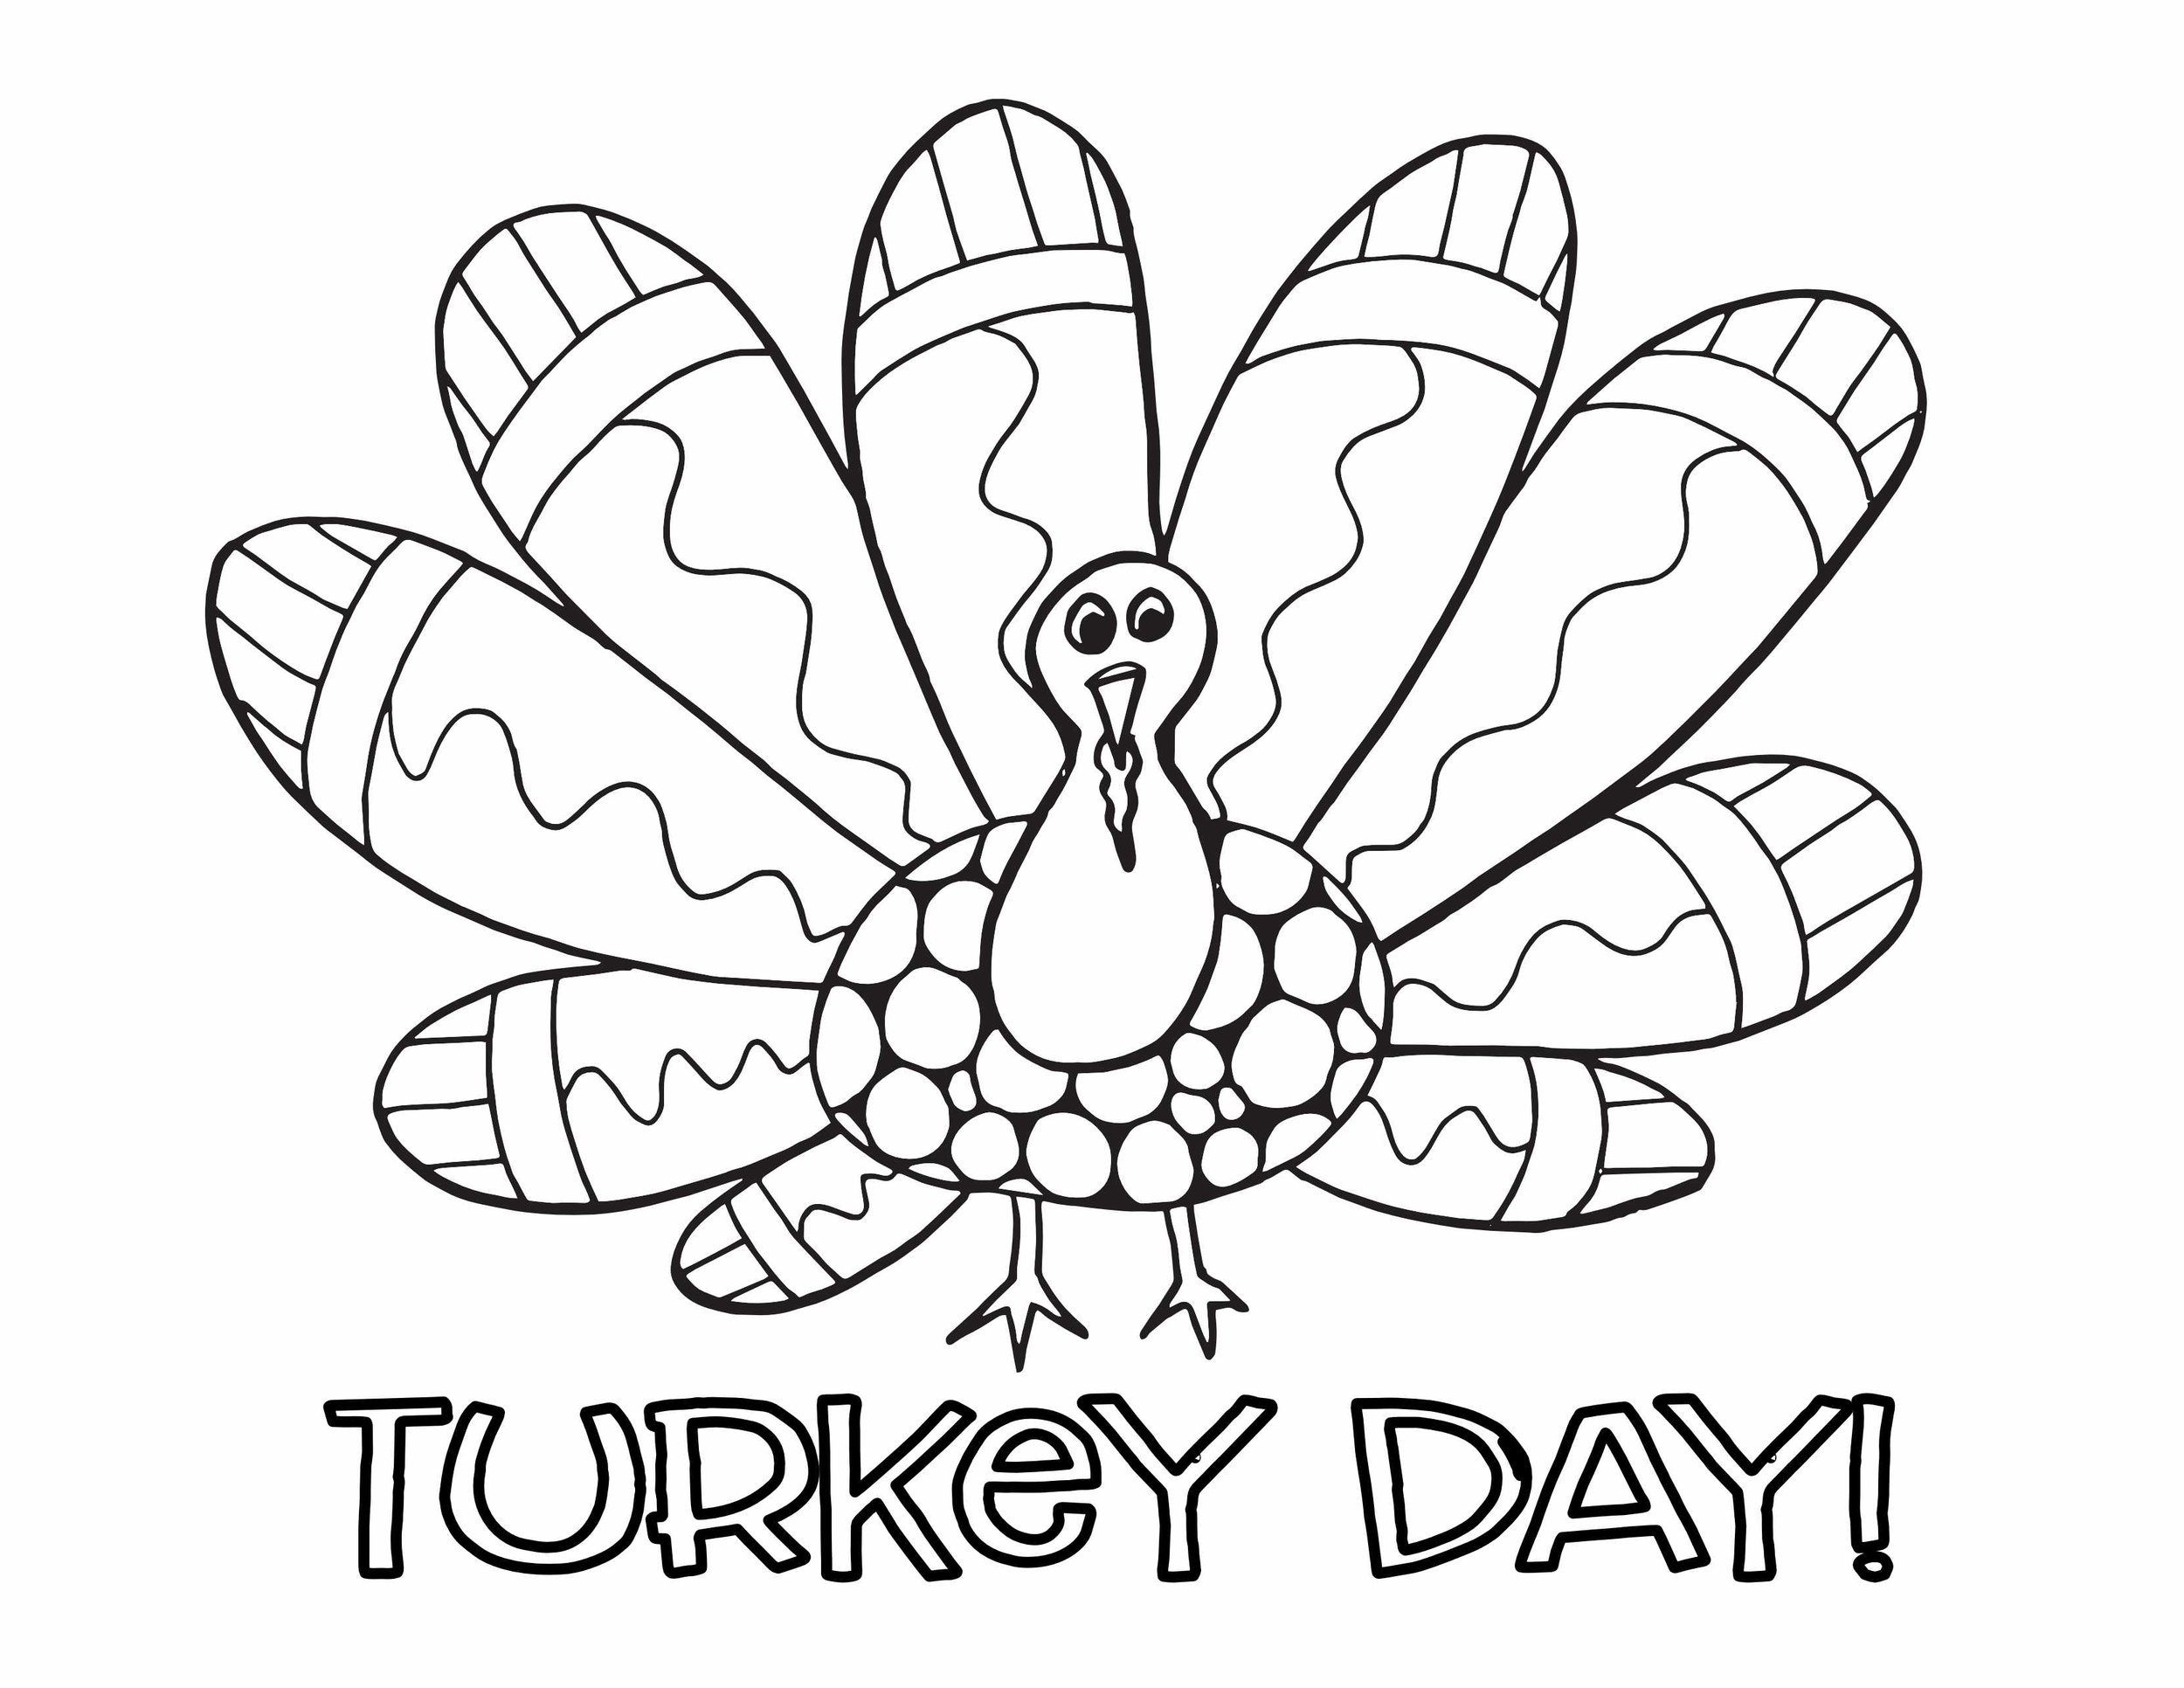 simple turkey drawing with doodles inside to color, colorable text "turkey day" underneath